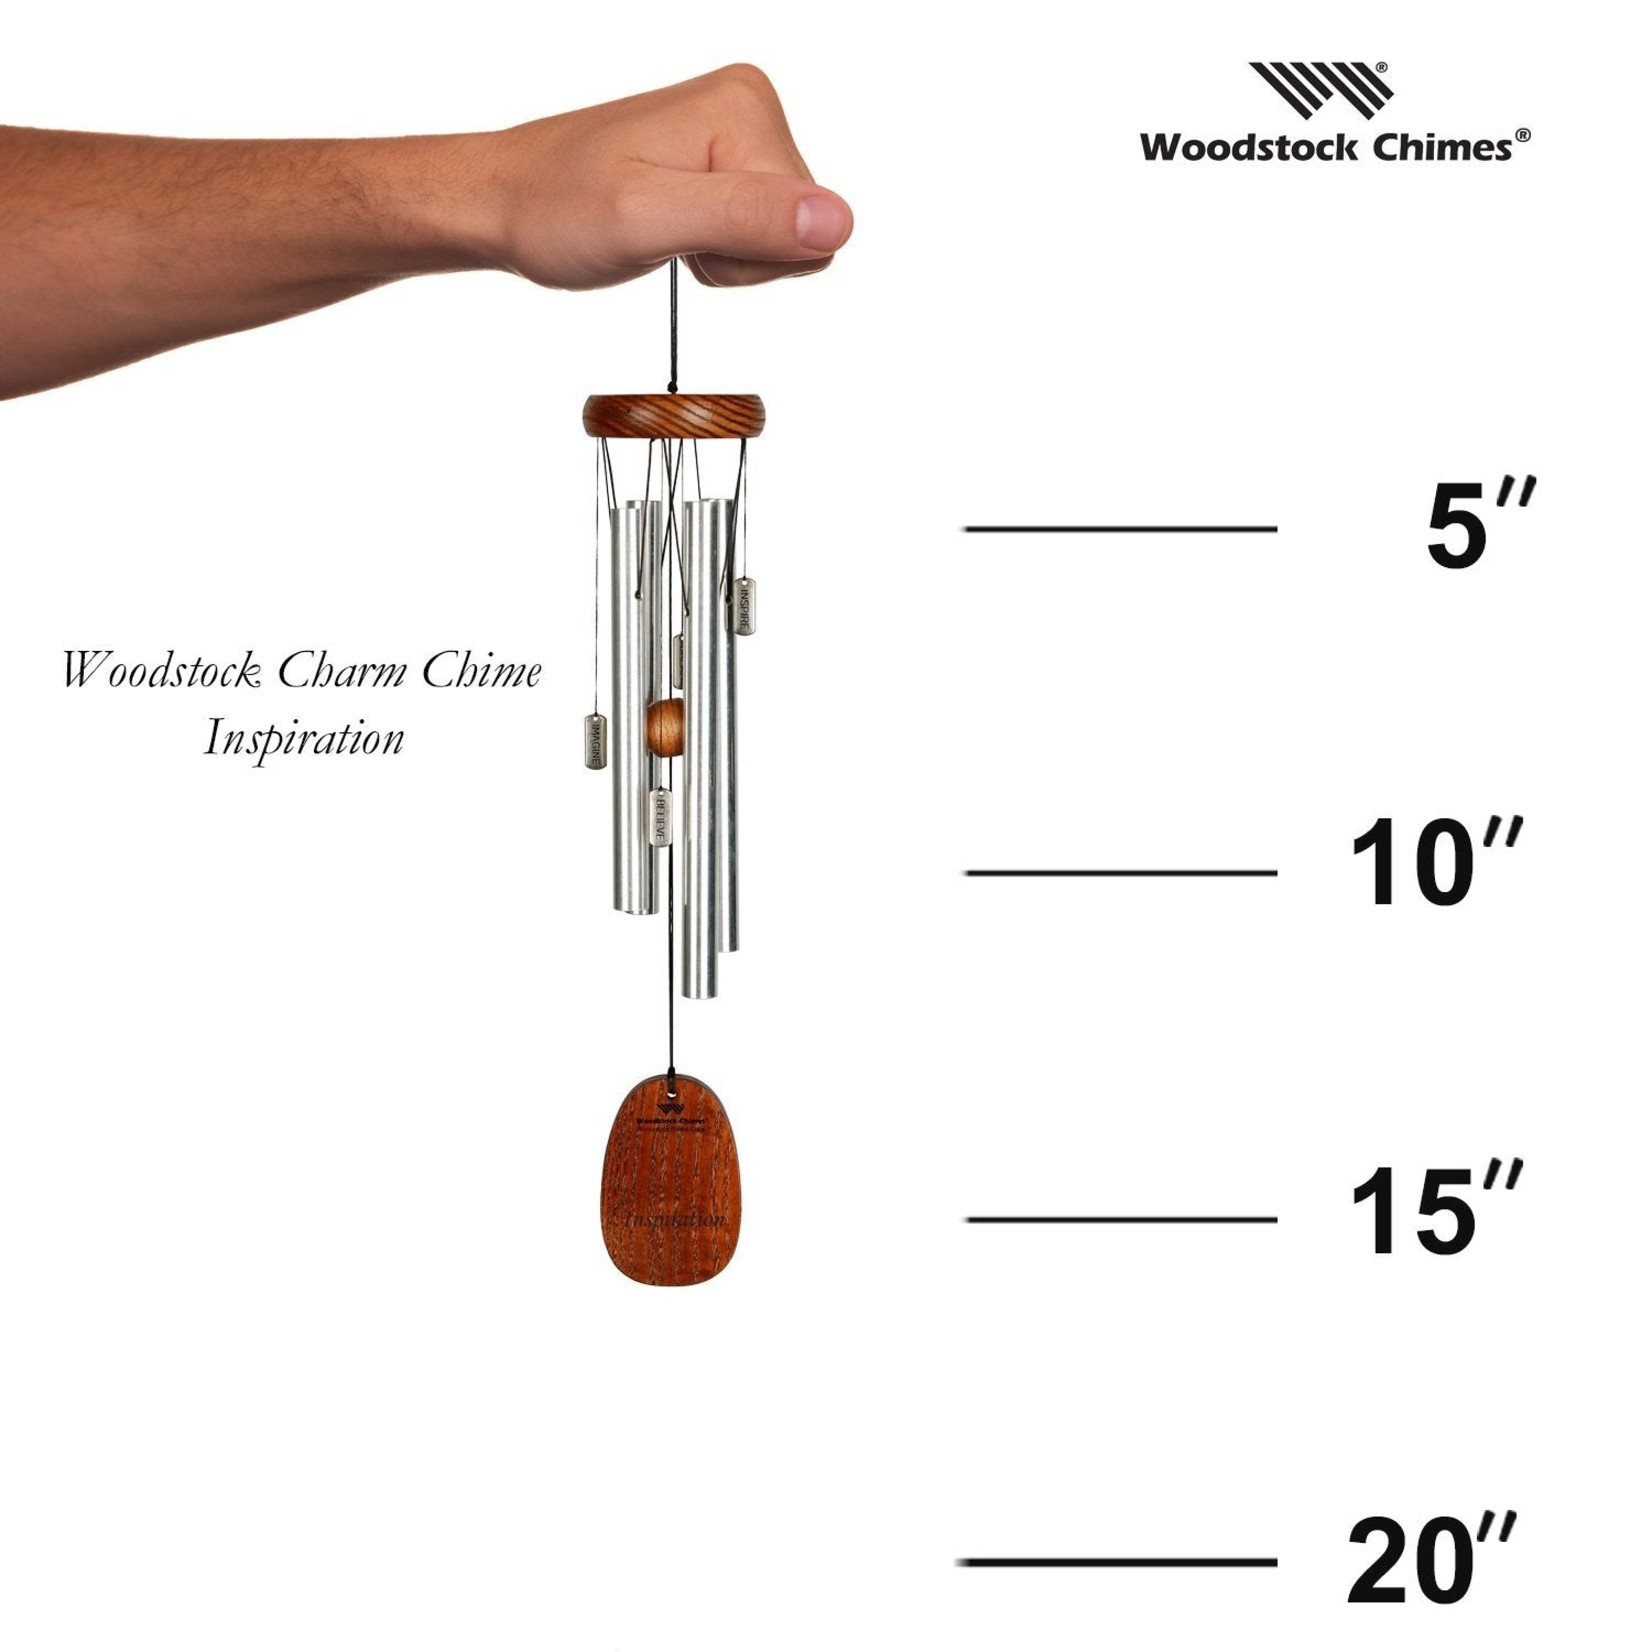 Woodstock Chimes Charm Chime - Inspiration